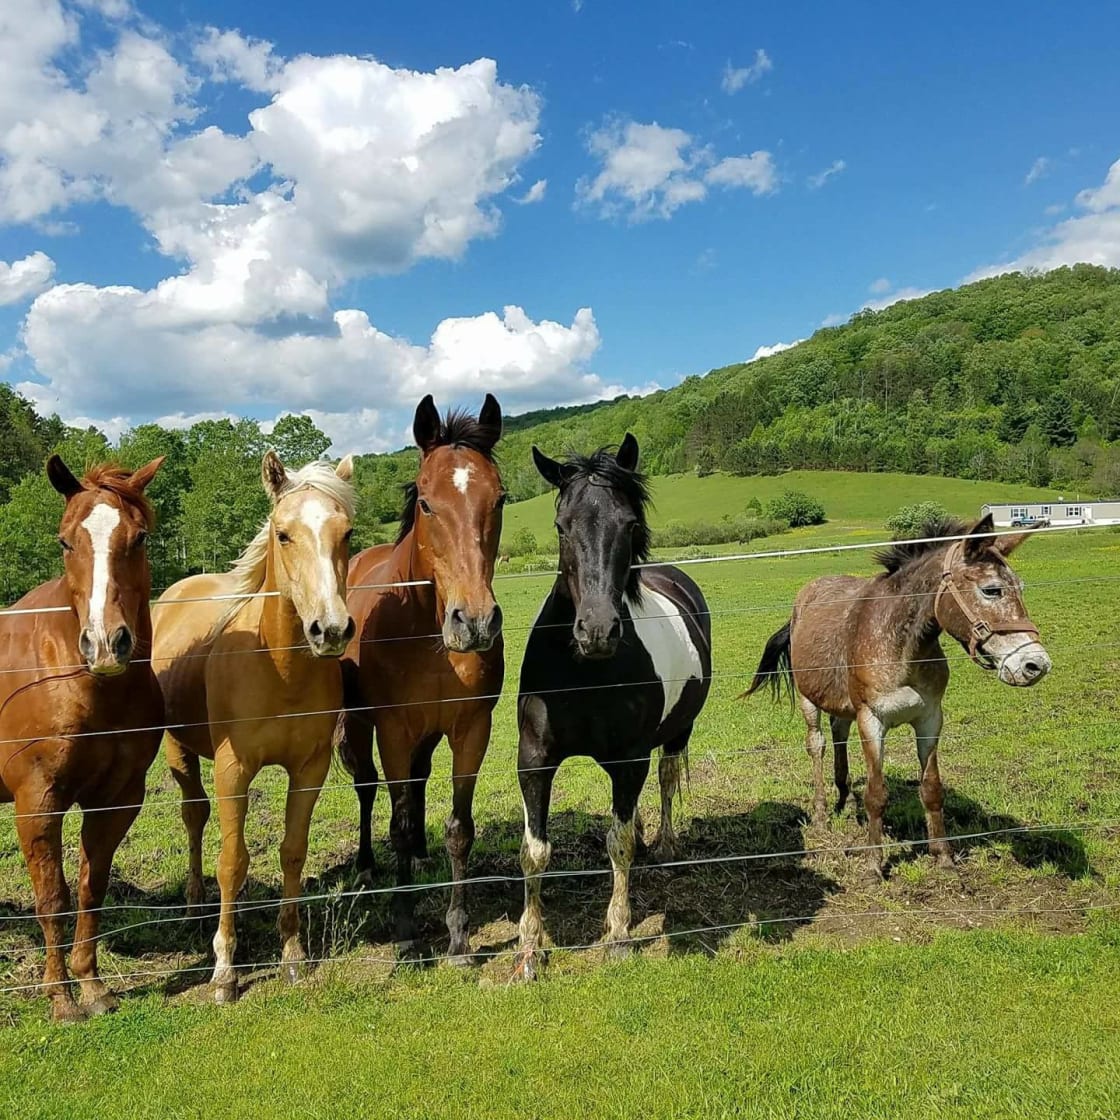 Five of our equines at Triple Dream Farm enjoying the warm weather.